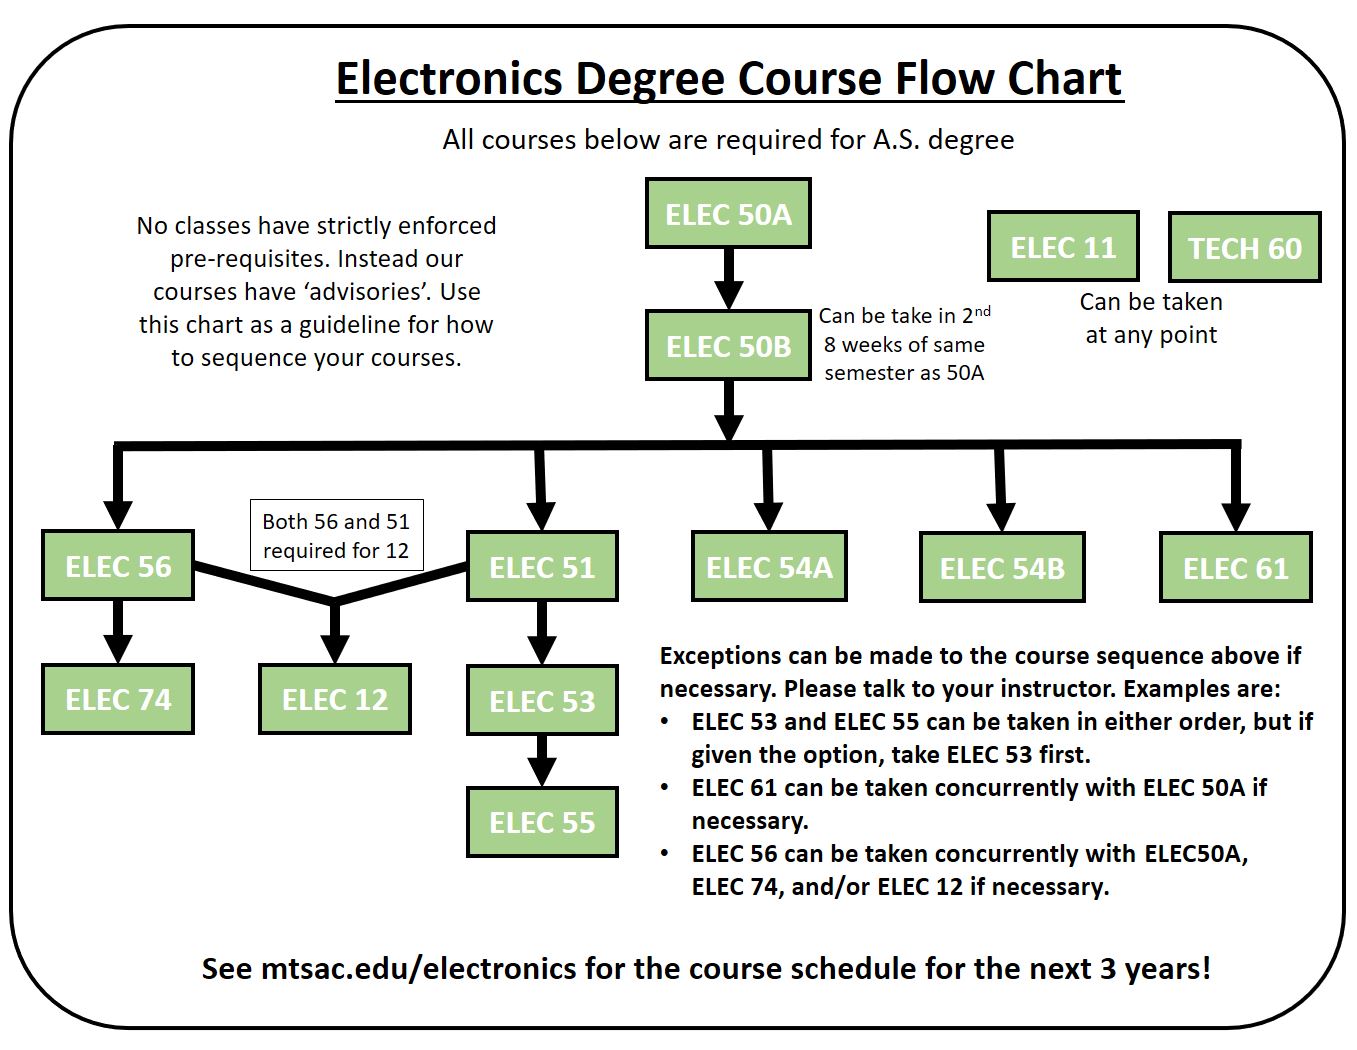 This flow chart depicts the order that electronics classes should be taken in the Electronics Department at Mt. San Antonio College. It shows that ELEC 11 and TECH 60 can be taken at any point. It shows ELEC 50A should be the first class you take followed by ELEC 50B. ELEC 50B can be taken in the 2nd 8 weeks of the same semester as ELEC 50A. The chart then shows that after ELEC 50B, any one of these courses can be taken: ELEC 56, ELEC 51, ELEC 54A, ELEC 54B and ELEC 61. It shows after ELEC 56 that ELEC 74 can be taken. After ELEC 51, ELEC 53 followed by ELEC 55 can be taken. After BOTH ELEC 56 and ELEC 51, then ELEC 12 can be taken.  It also says the following: Exceptions can be made to the course sequence if necessary. Please talk to your instructor. Examples are: ELEC 53 and ELEC 55 can be taken in either order, but if given the option, take ELEC 53 first. ELEC 61 can be taken concurrently with ELEC 50A if necessary. ELEC 56 can be taken concurrently with ELEC50A, ELEC 74, and/or ELEC 12 if necessary. No classes have strictly enforced pre-requisites. Instead our courses have ‘advisories’. Use this chart as a guideline for how to sequence your courses.